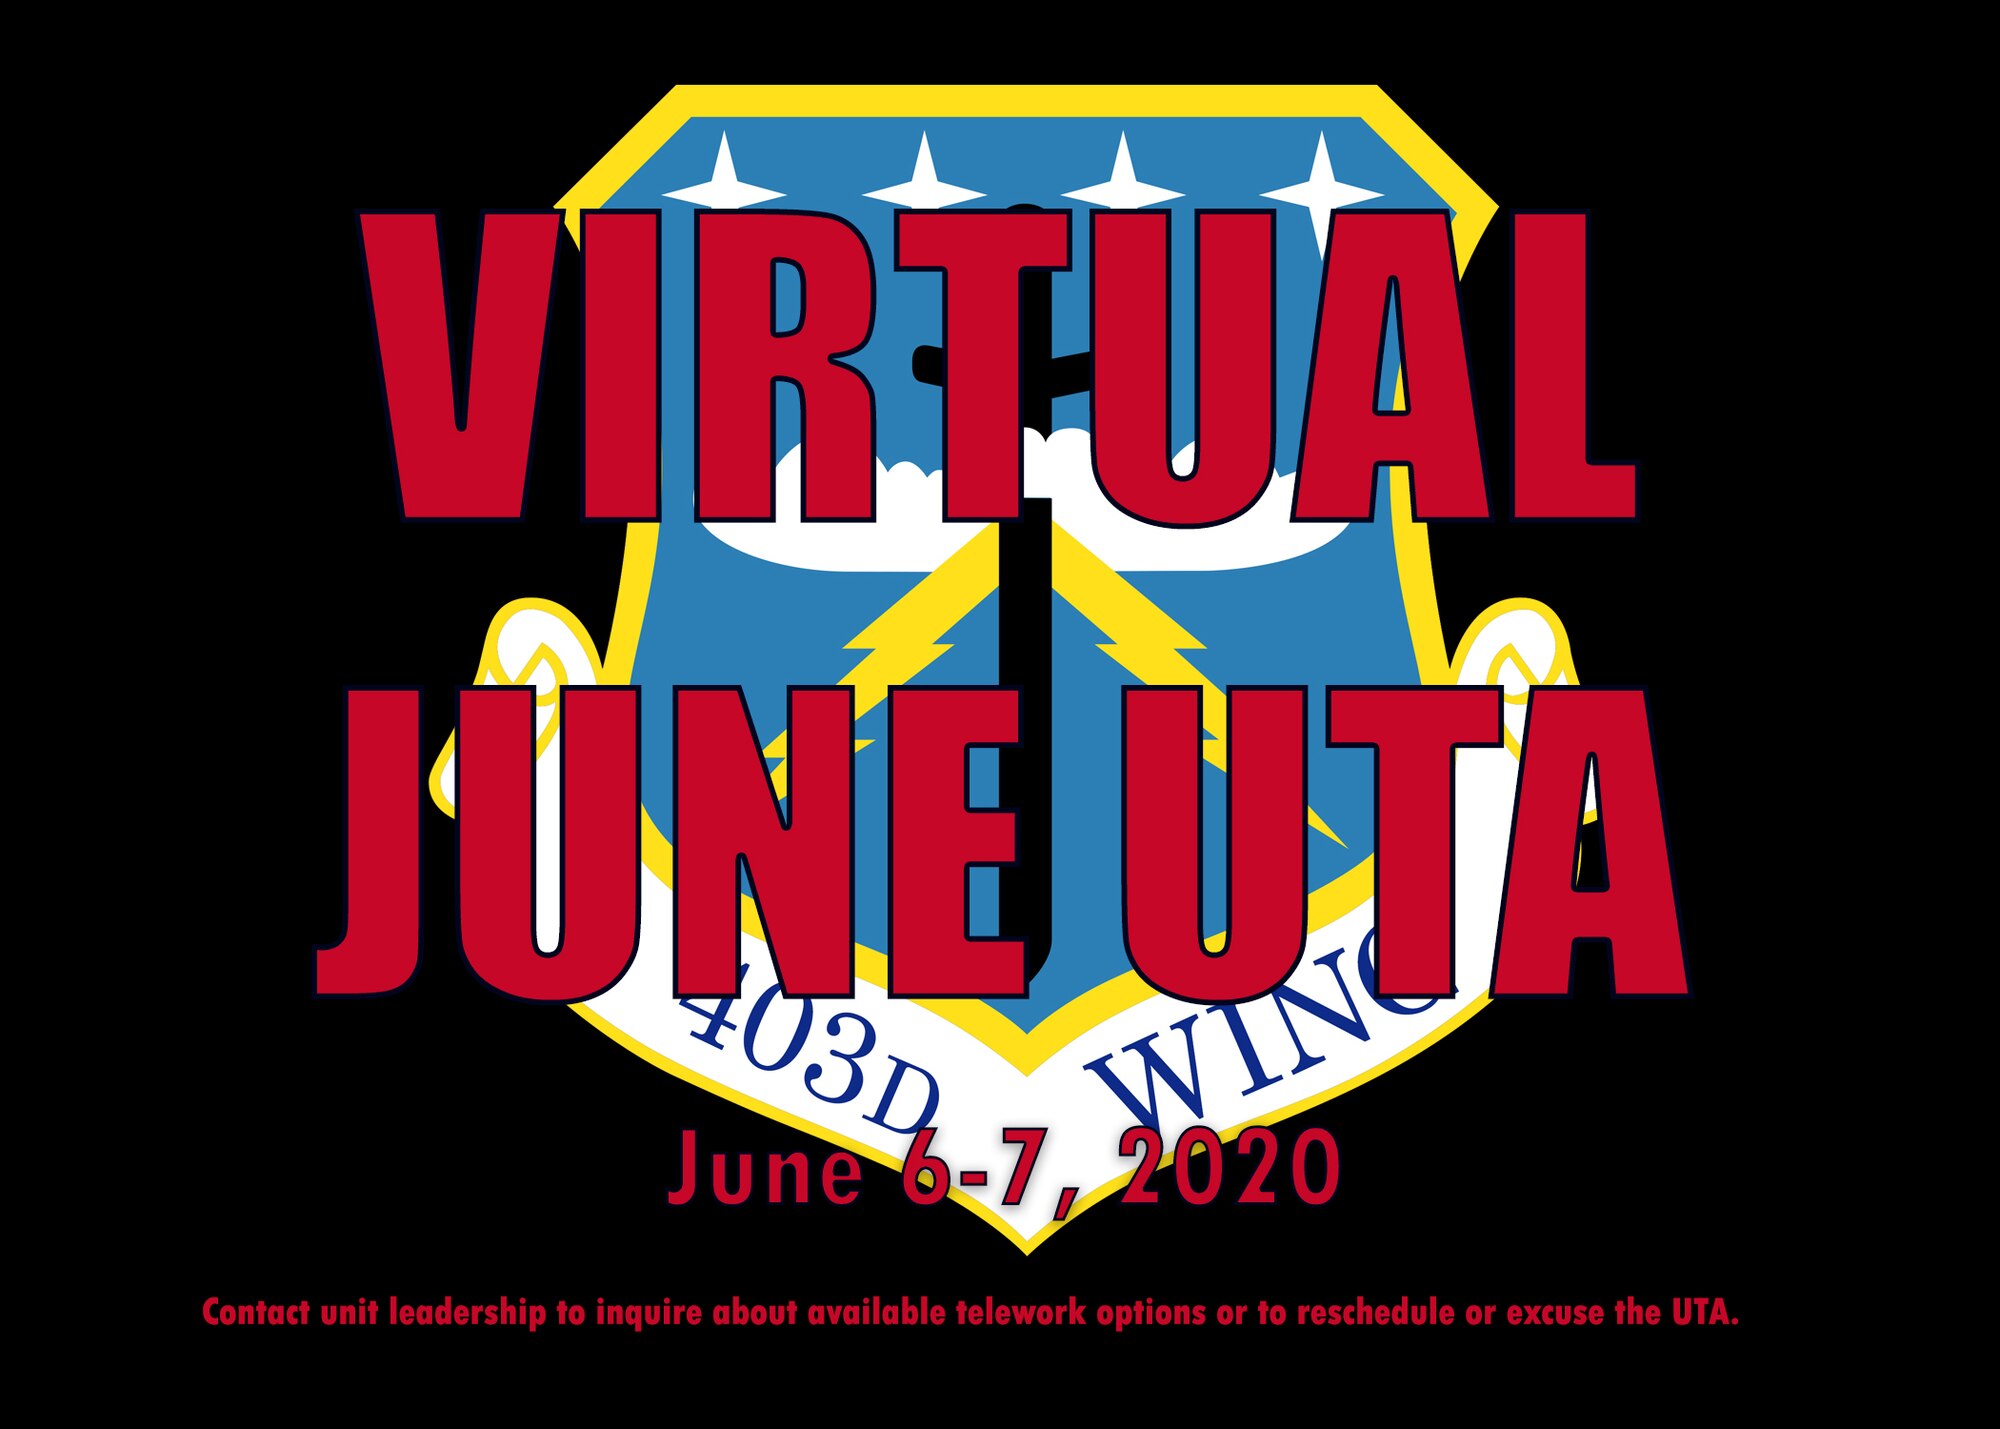 As part of ongoing COVID-19 mitigation efforts, the 403rd Wing at Keesler Air Force Base, Mississippi, is having a virtual Unit Training Assembly June 6-7, 2020. Wing Reserve Citizen Airmen should coordinate with their supervisors and commanders to inquire about telework options or to reschedule or excuse the UTA. (U.S. Air Force graphic by Lt. Col. Marnee A.C. Losurdo)